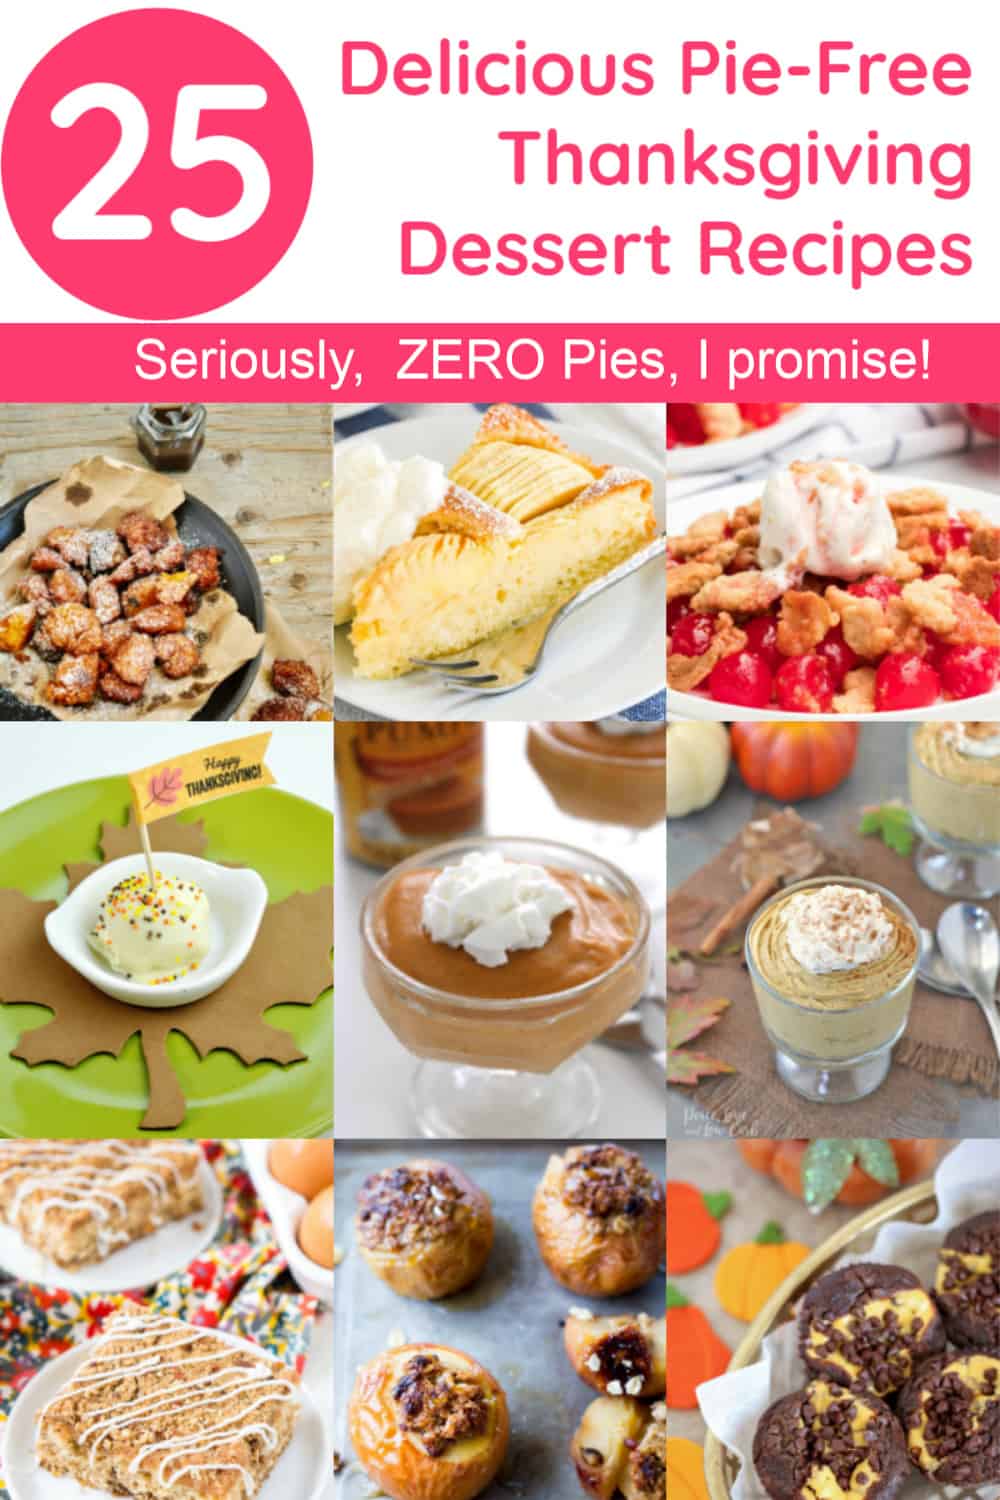 Looking for a few new Thanksgiving dessert ideas that think outside the pie plate? I've got you covered! Read on for 25 delicious totally pie-free recipes!